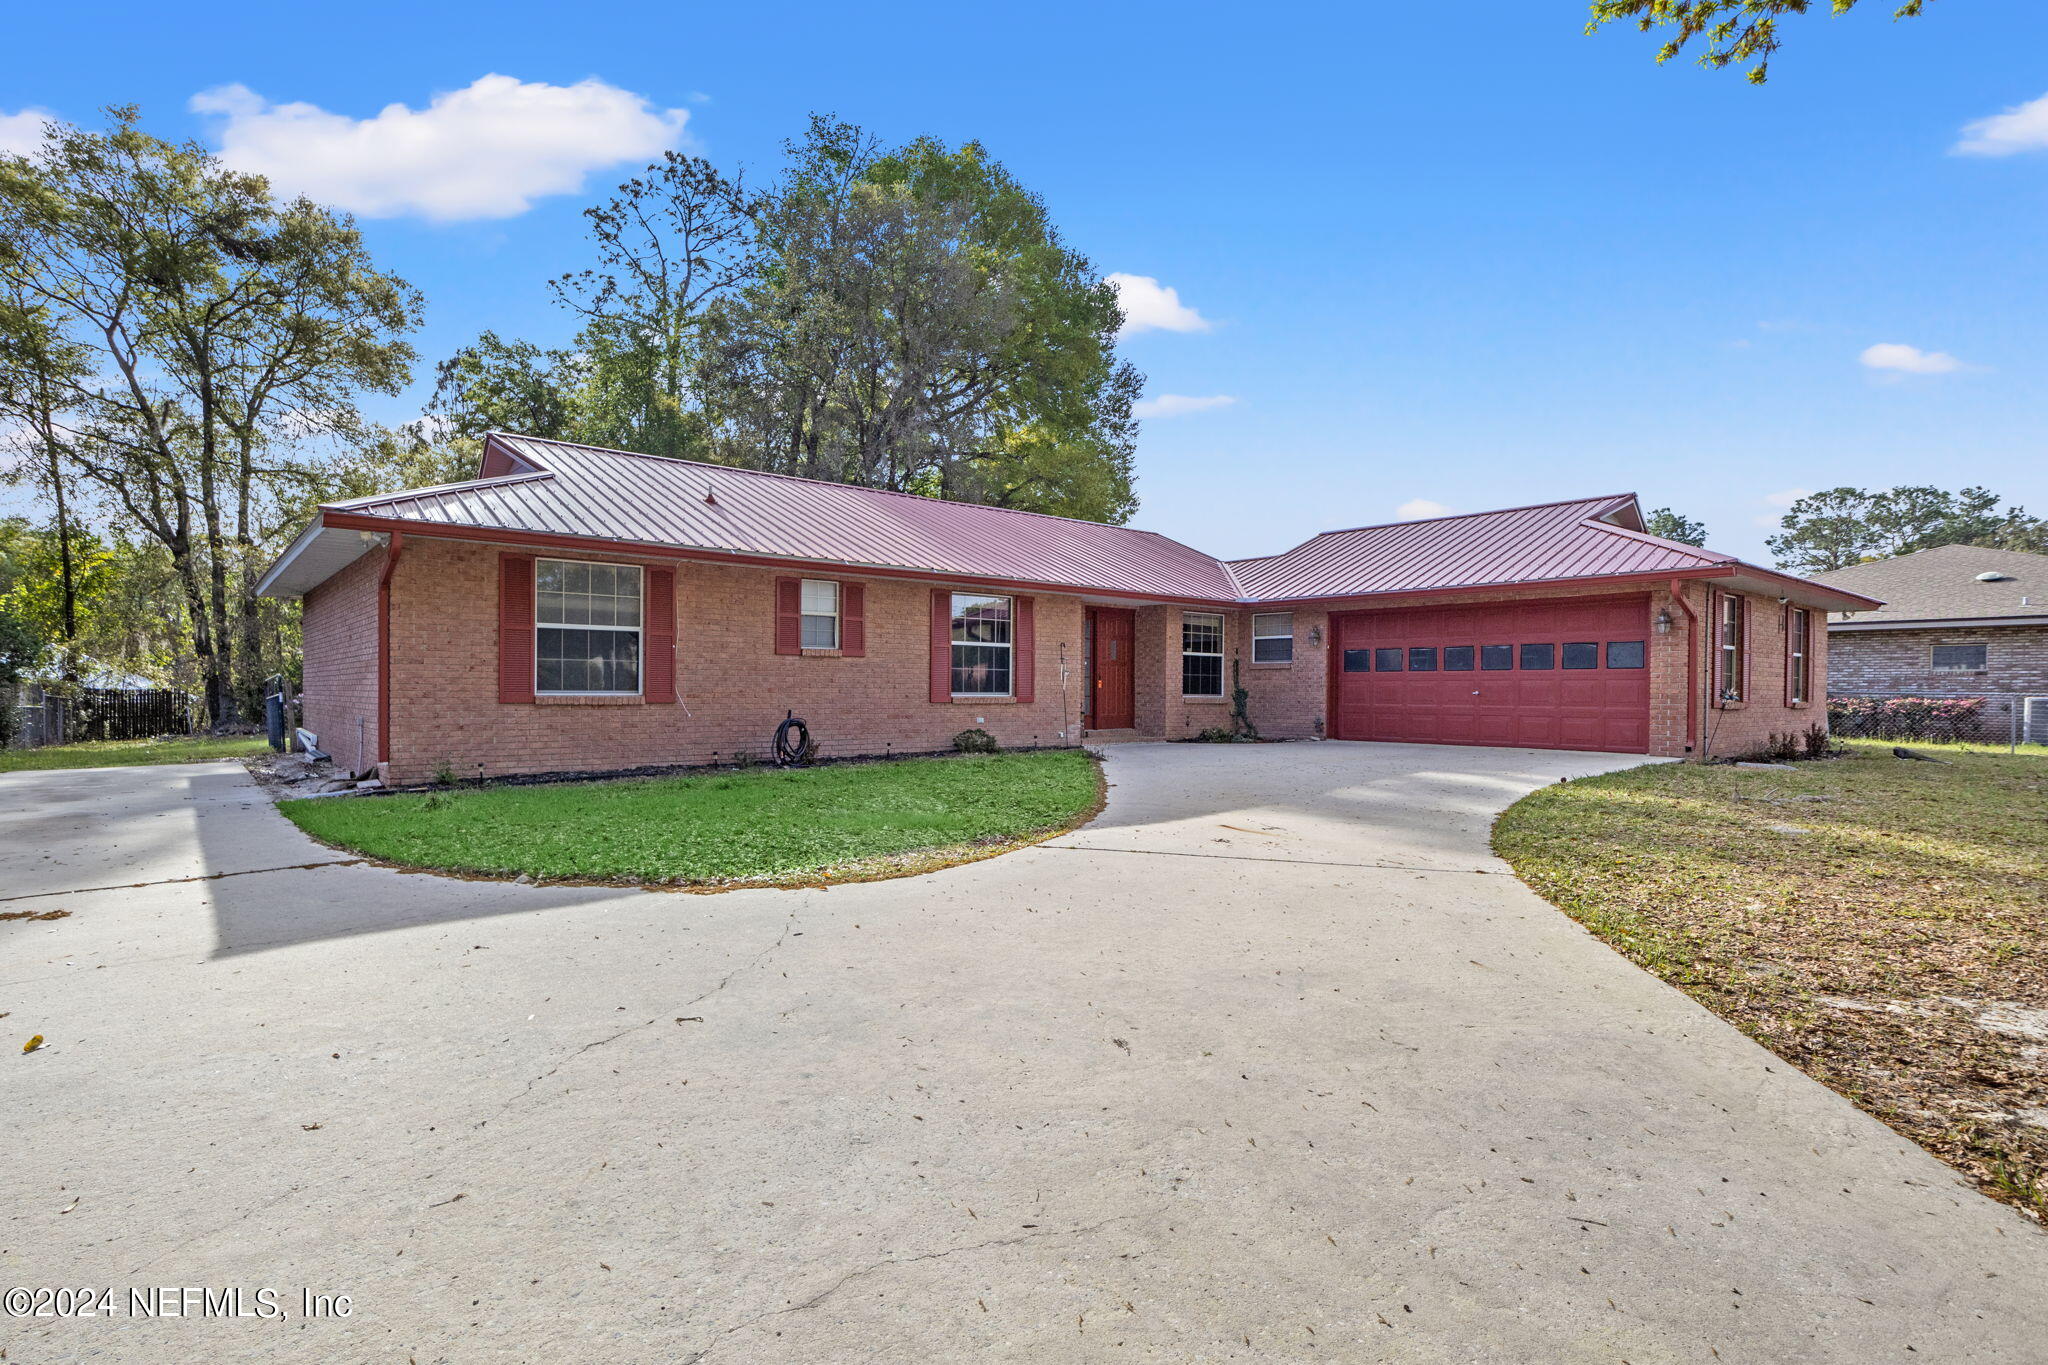 Keystone Heights, FL home for sale located at 4223 SE 1st Avenue, Keystone Heights, FL 32656